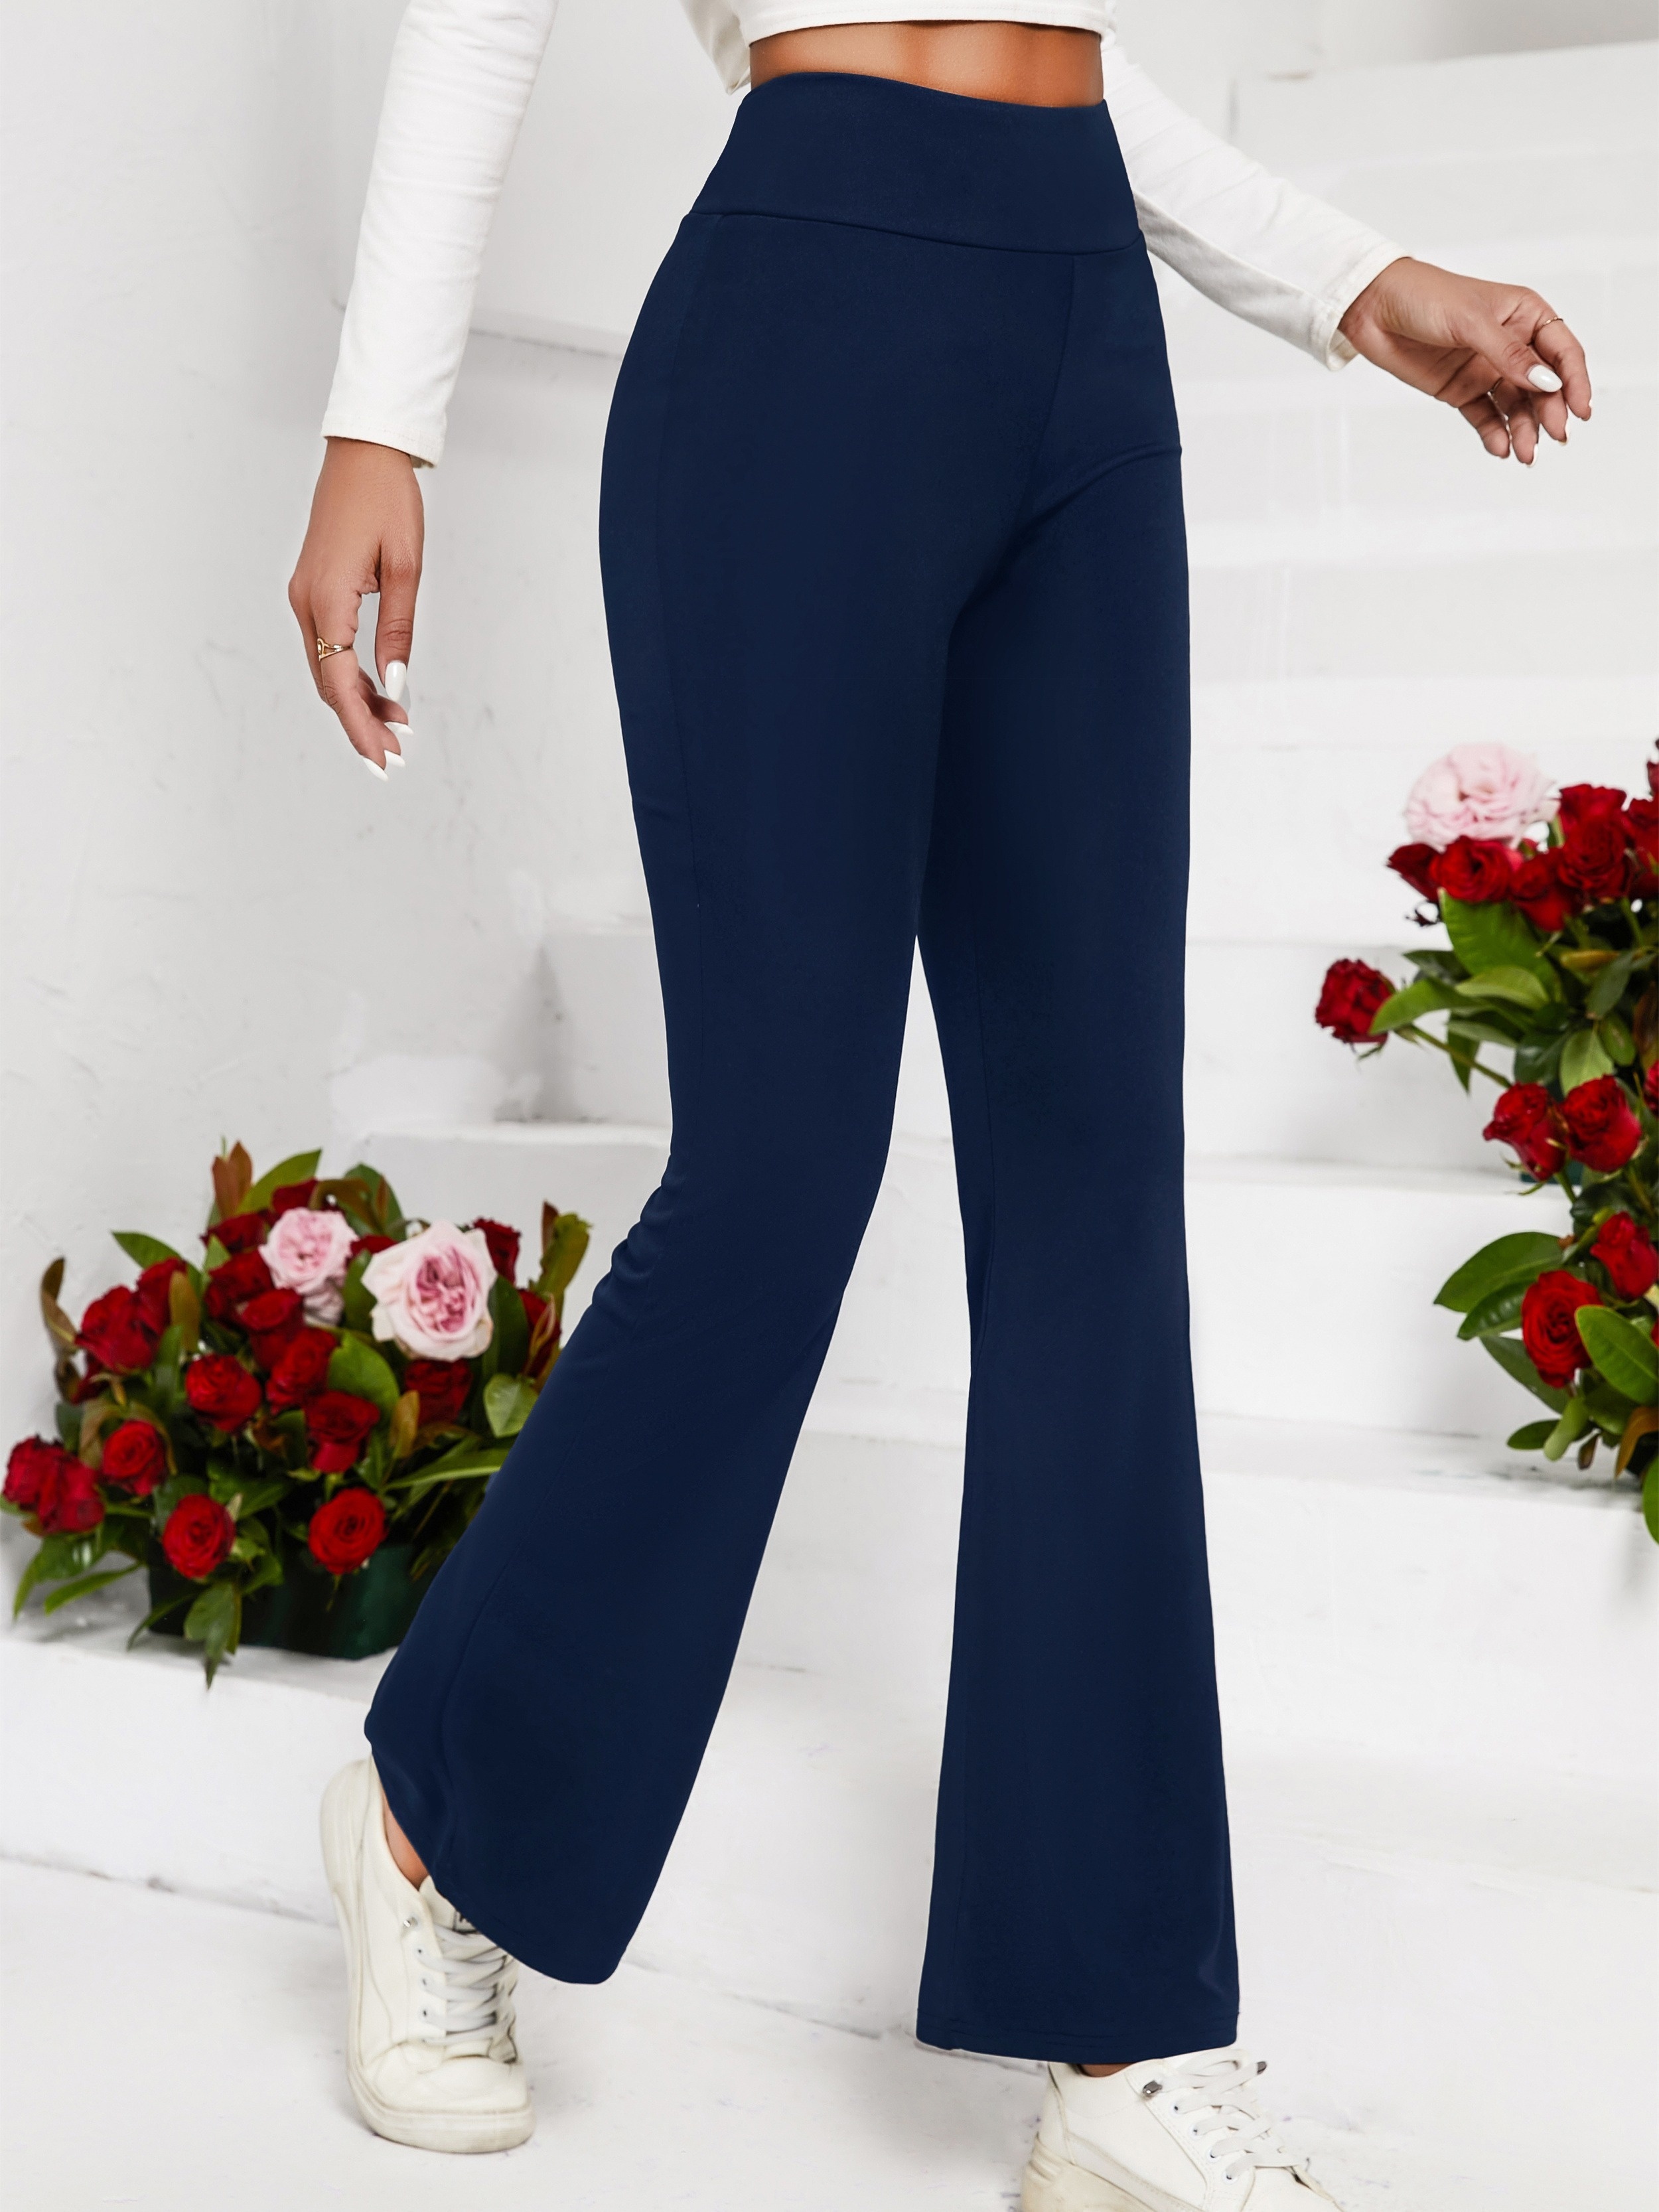 YUNAFFT Women High Waist Casual Wide Leg Long Pants Women's Slim Fit Flare  Solid Suit Pants Leisure Trousers Bell-bottoms Solid Color Pants